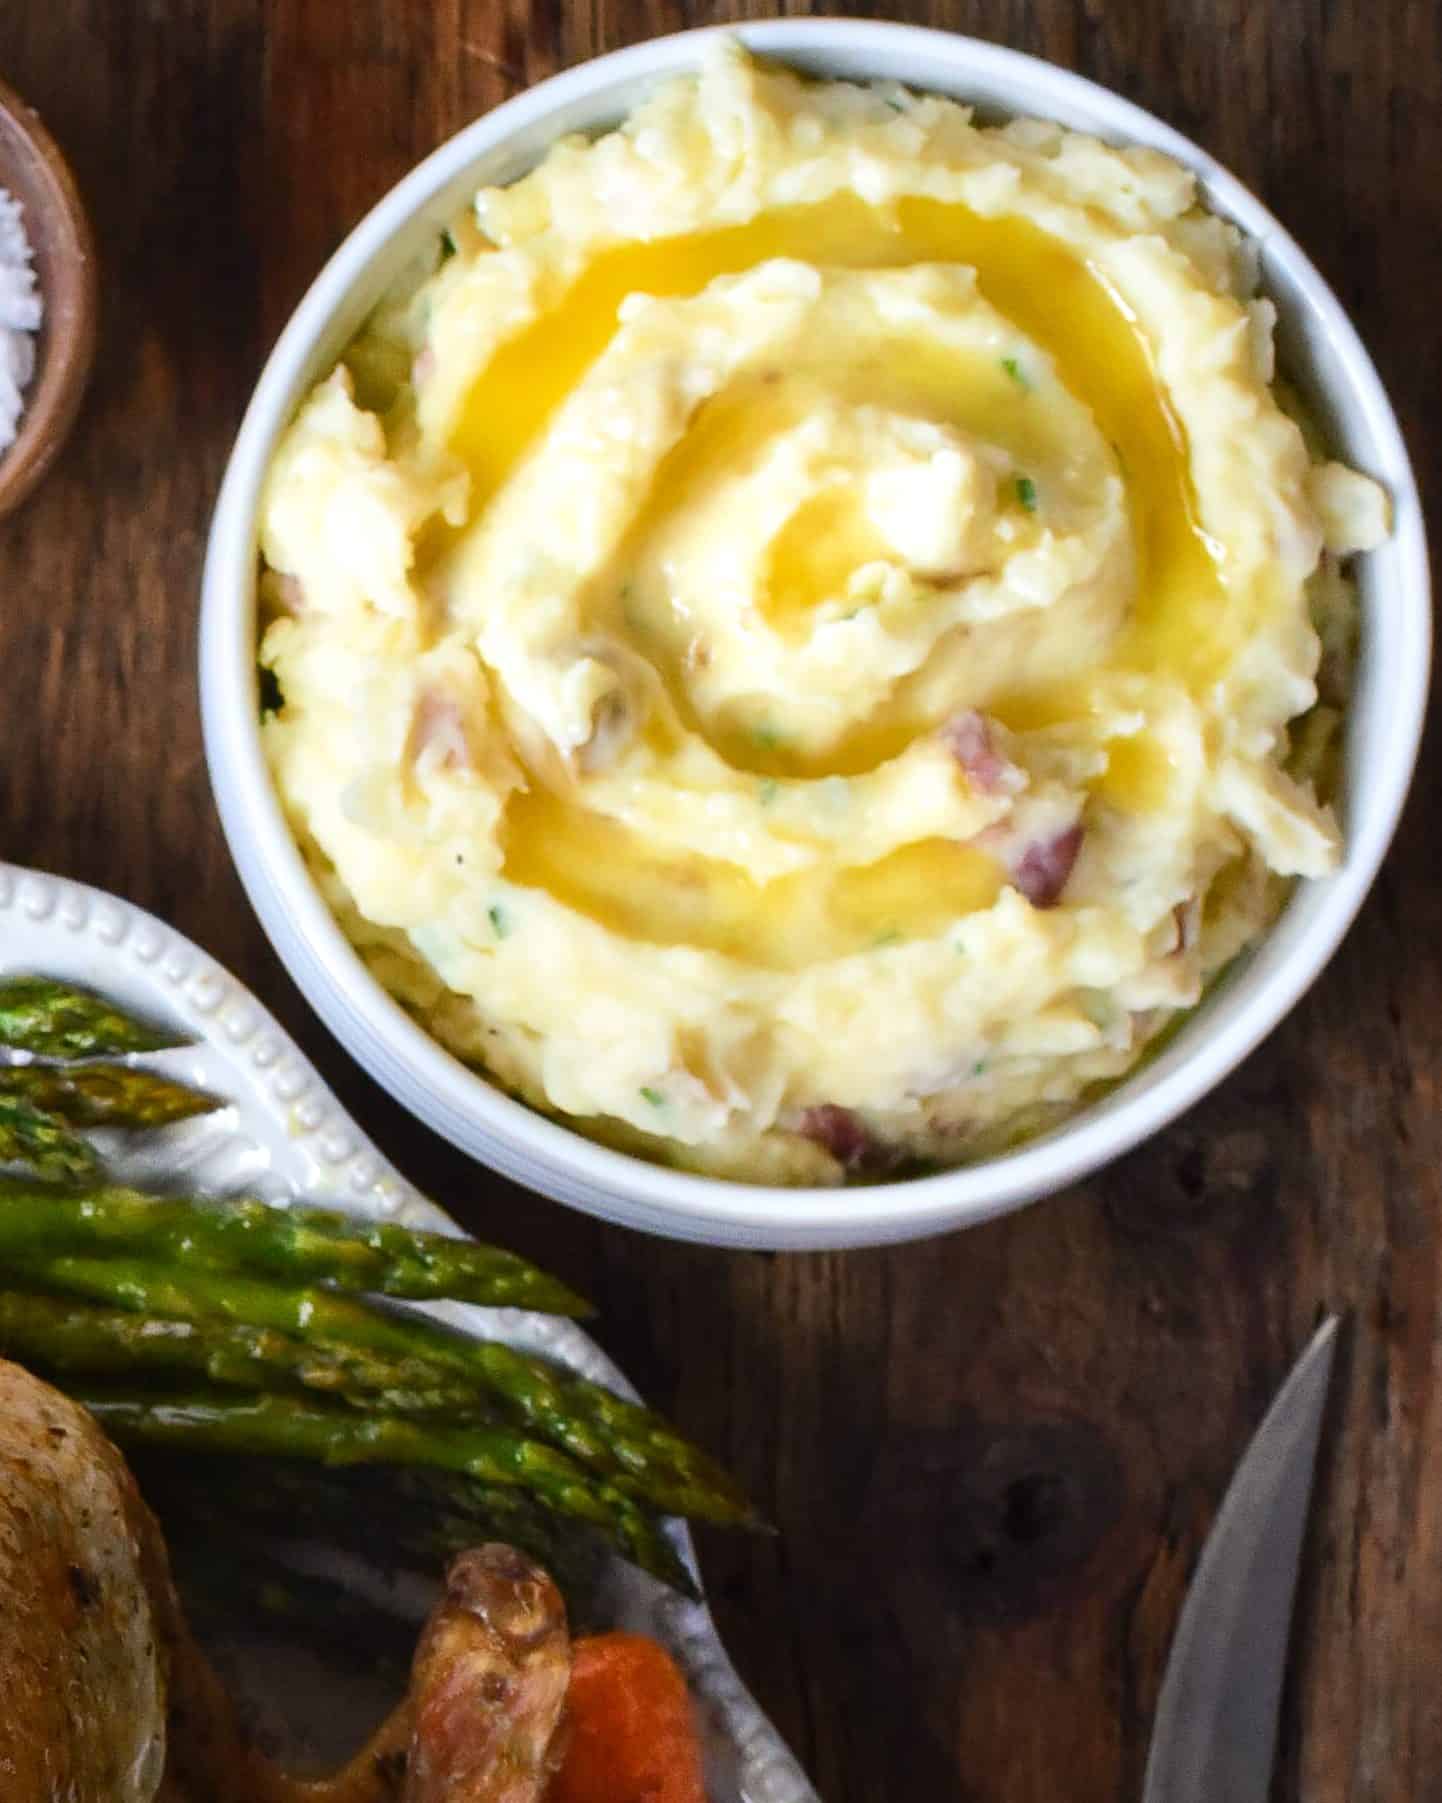 A bowl of mashed potatoes with a swirl of melted butter.